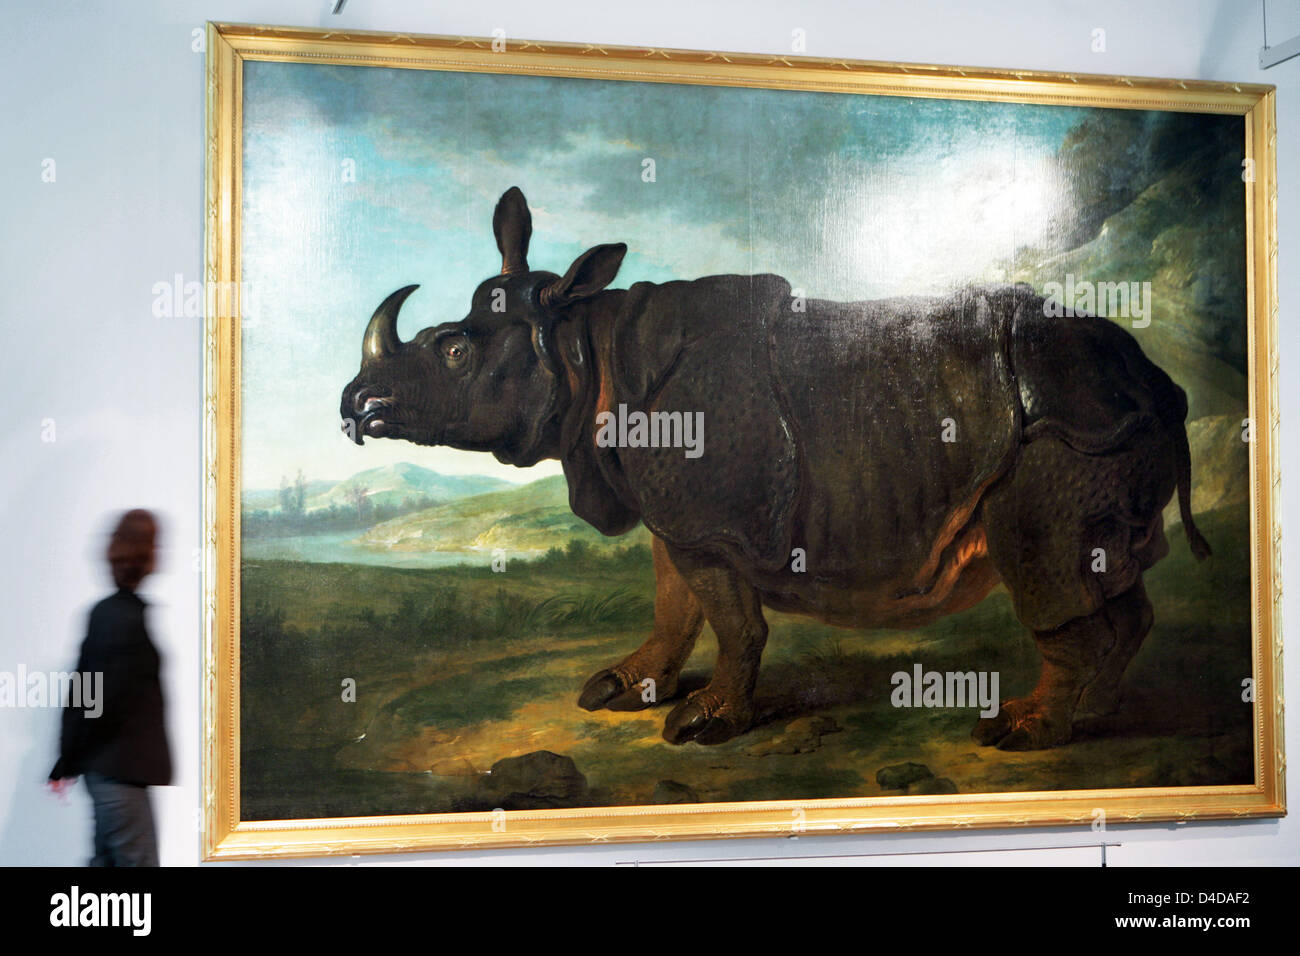 Staff of the Schwerin State Museum eyes the painting 'Rhinceros' by French court painter Jean-Baptiste Oudry (1686-1755) in Schwerin, Germany, 10 April 2008. The 3.10 by 4.56-metres oil-on-canvas painting was originally made for the botanical garden of King Louis XV of France and arrived at the residence of the Mecklenburg dukes in Ludwigslust, Germany in 1750 where it went straigh Stock Photo